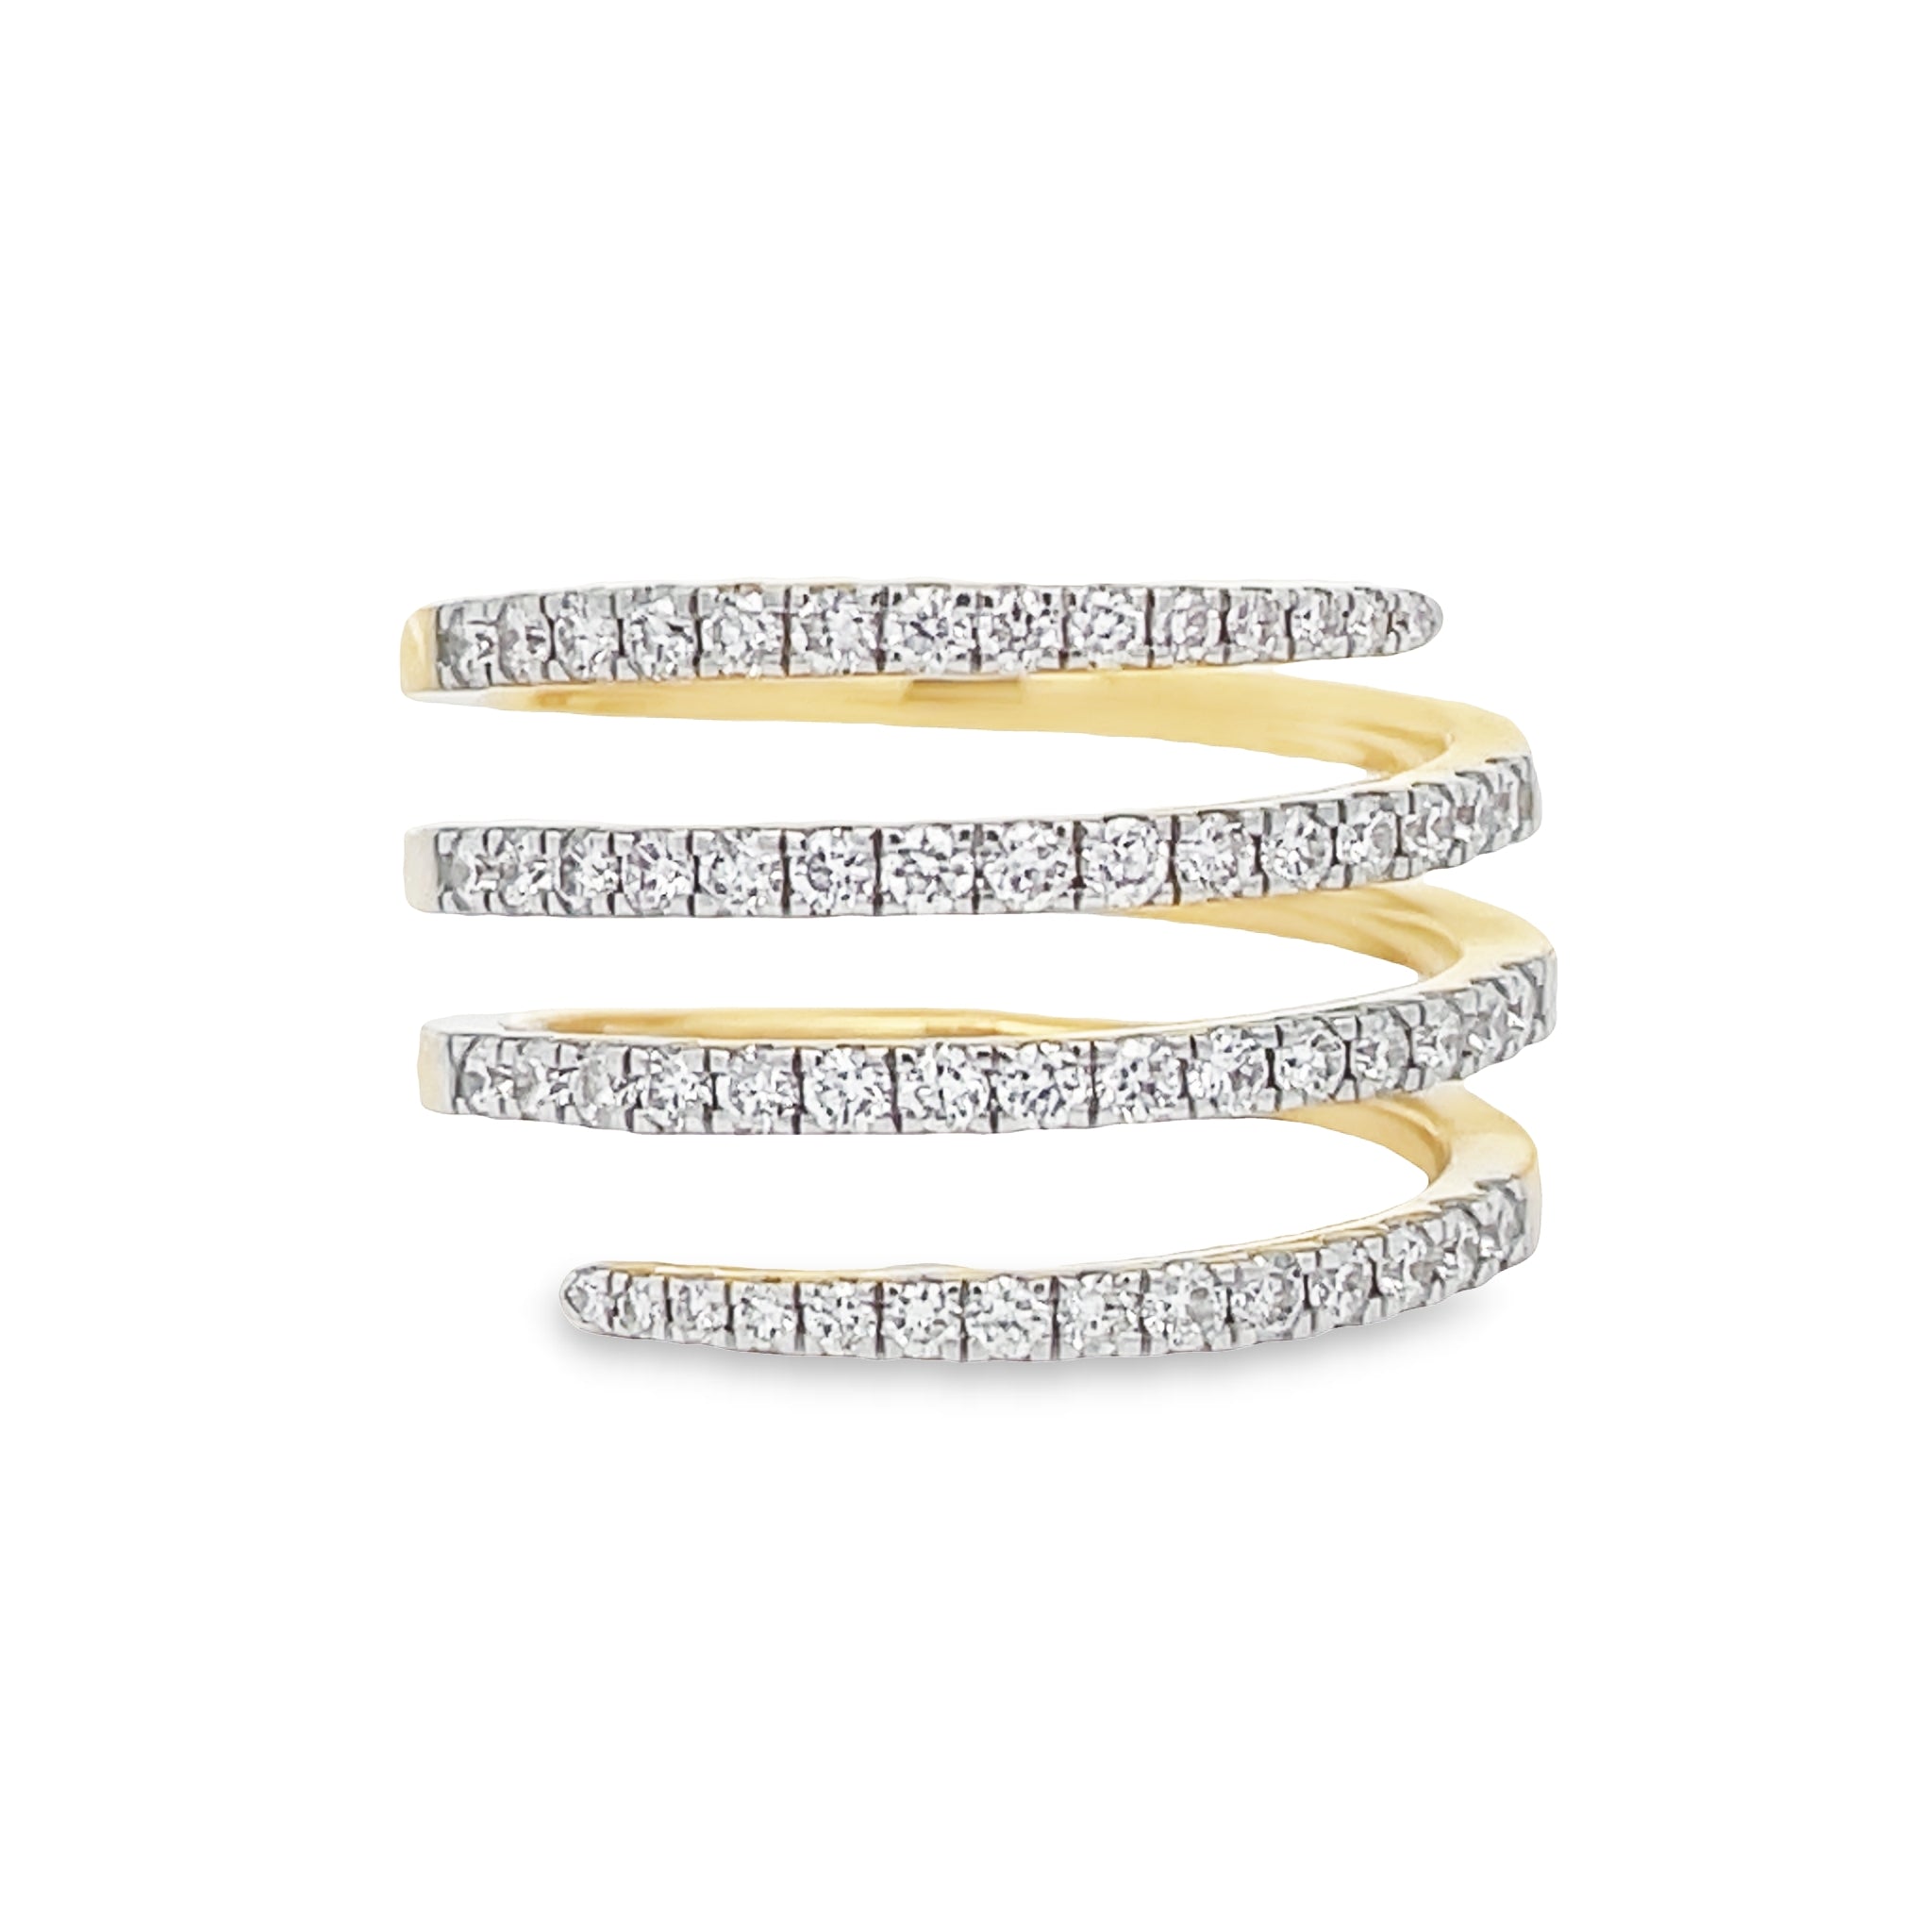 Showcasing four level wrap around with 0.76 cts of sparkling round diamonds, this stunning 14k Yellow Gold ring is a true showstopper. Treat yourself or someone special to this exceptional piece of timeless elegance and beauty!  .